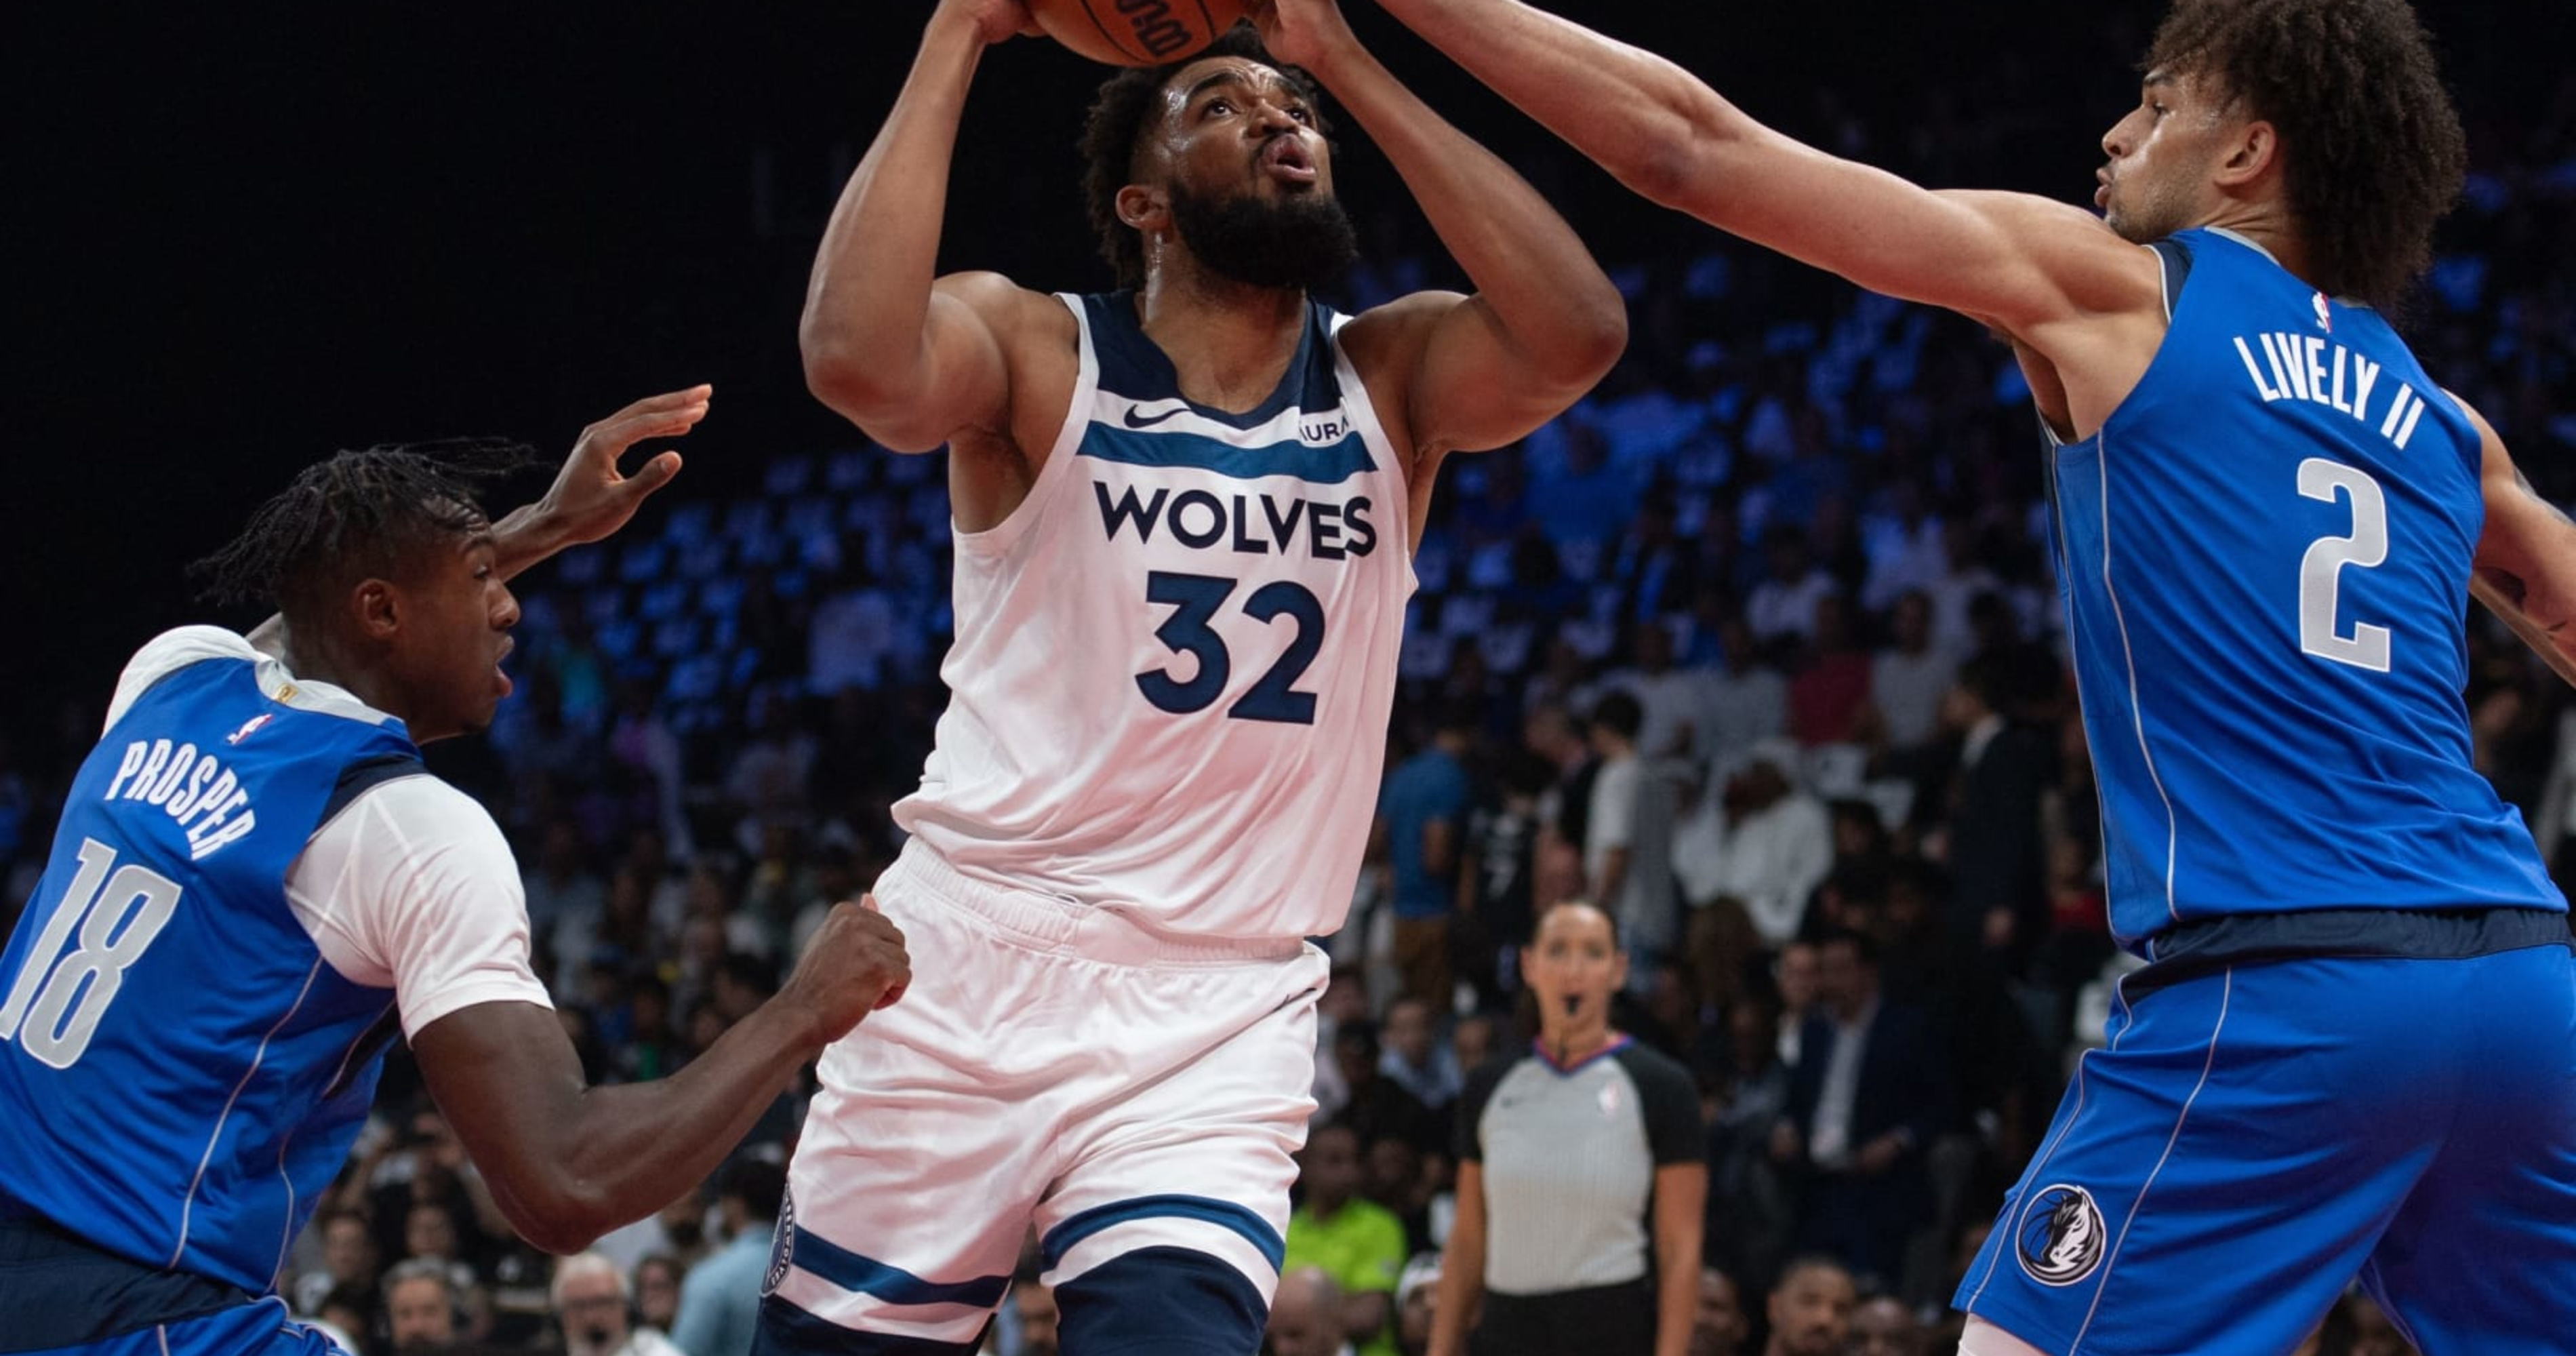 Timberwolves star Karl Anthony-Towns wins All-Star 3-Point Contest